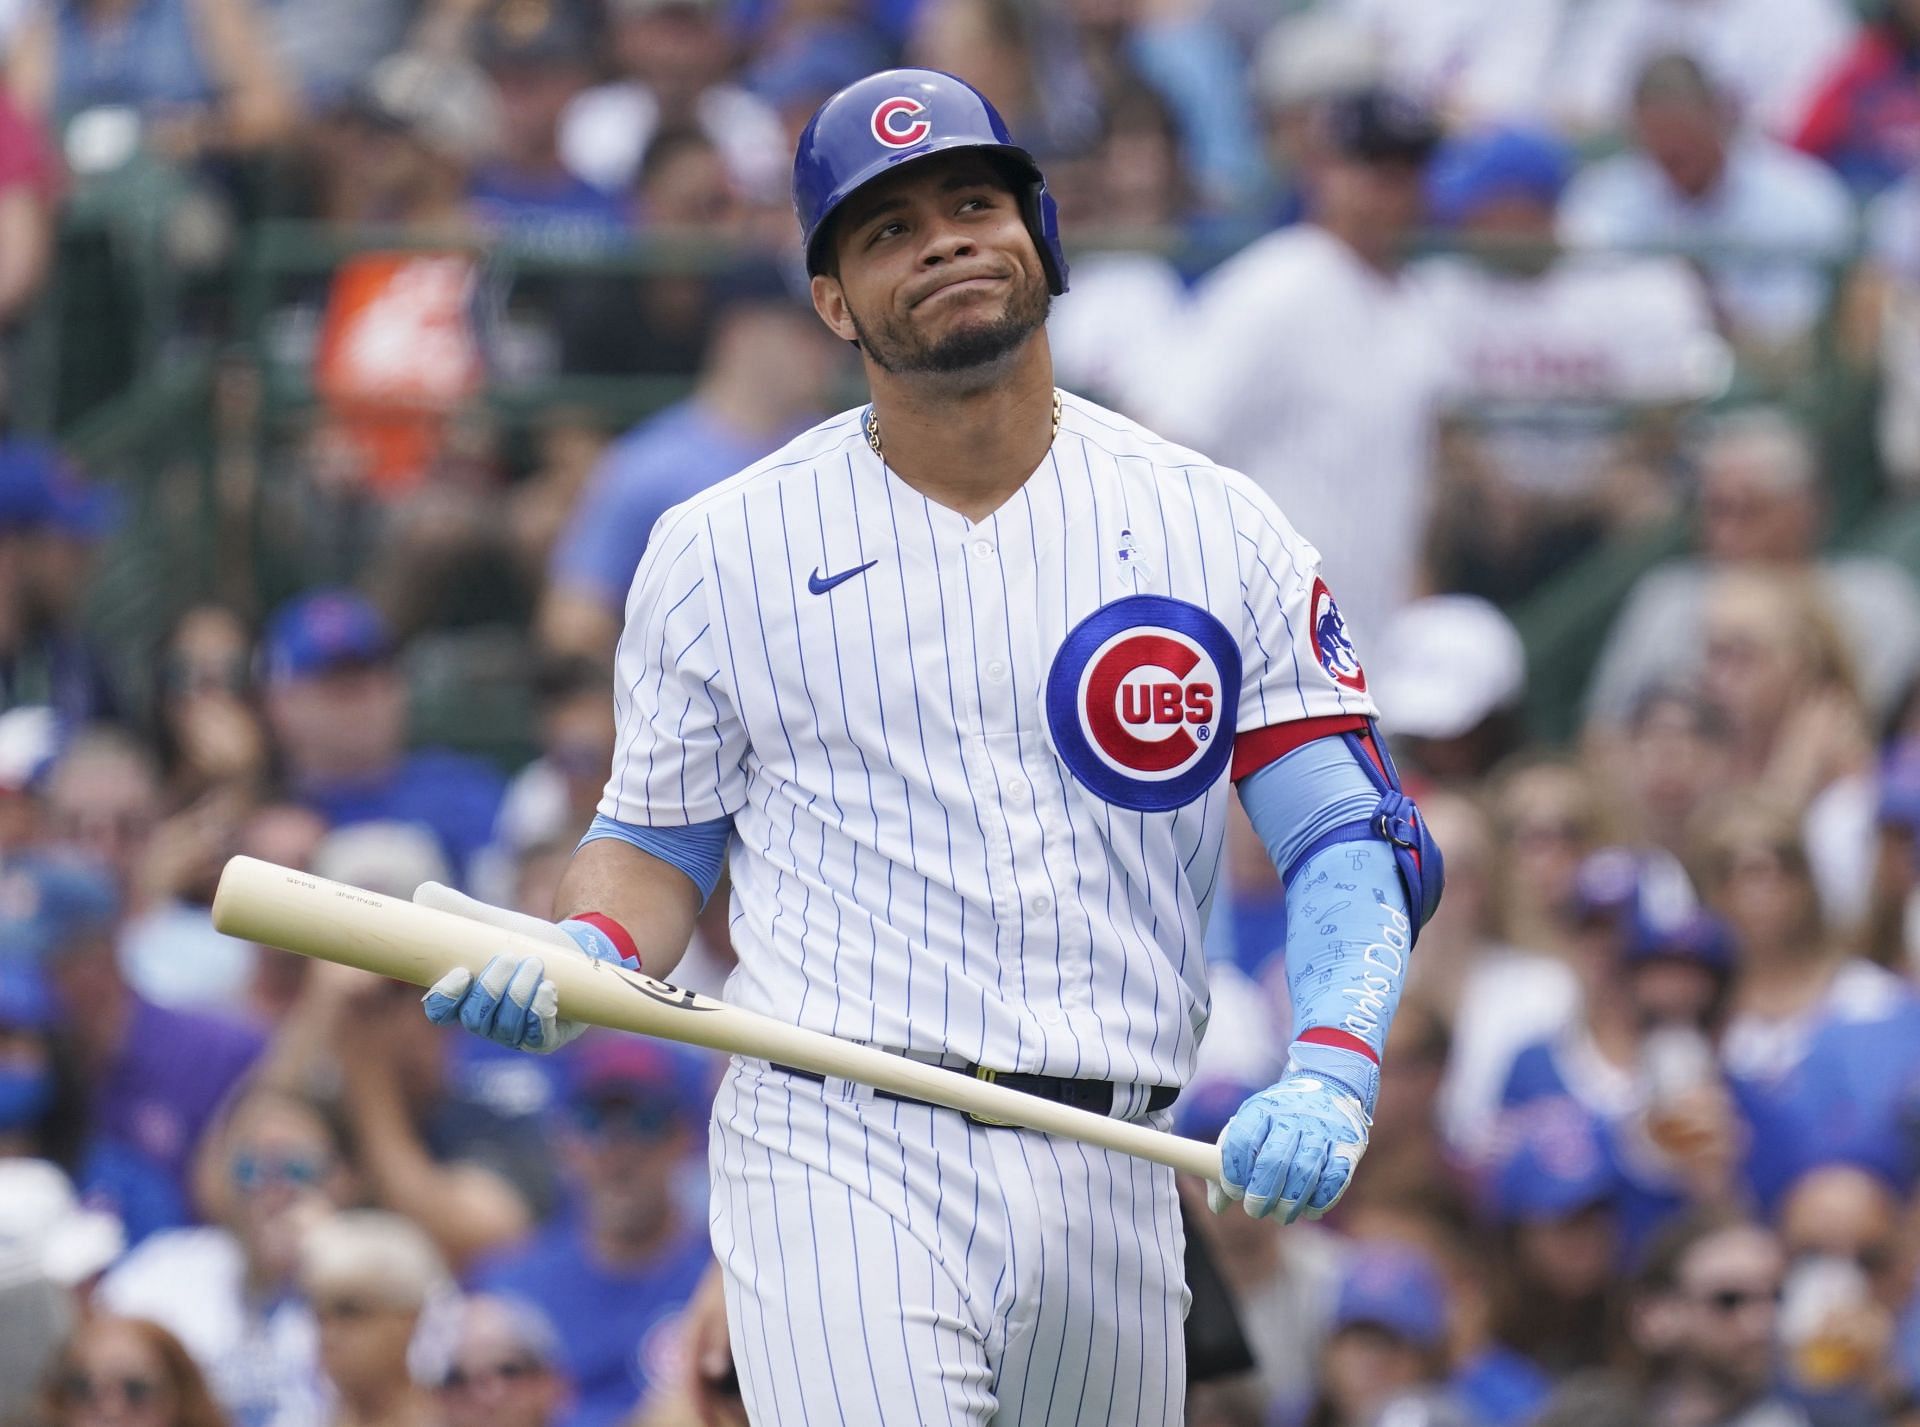 Willson Contreras of the Chicago Cubs is in the last year of his contract and is rumored to be traded at the deadline this year.